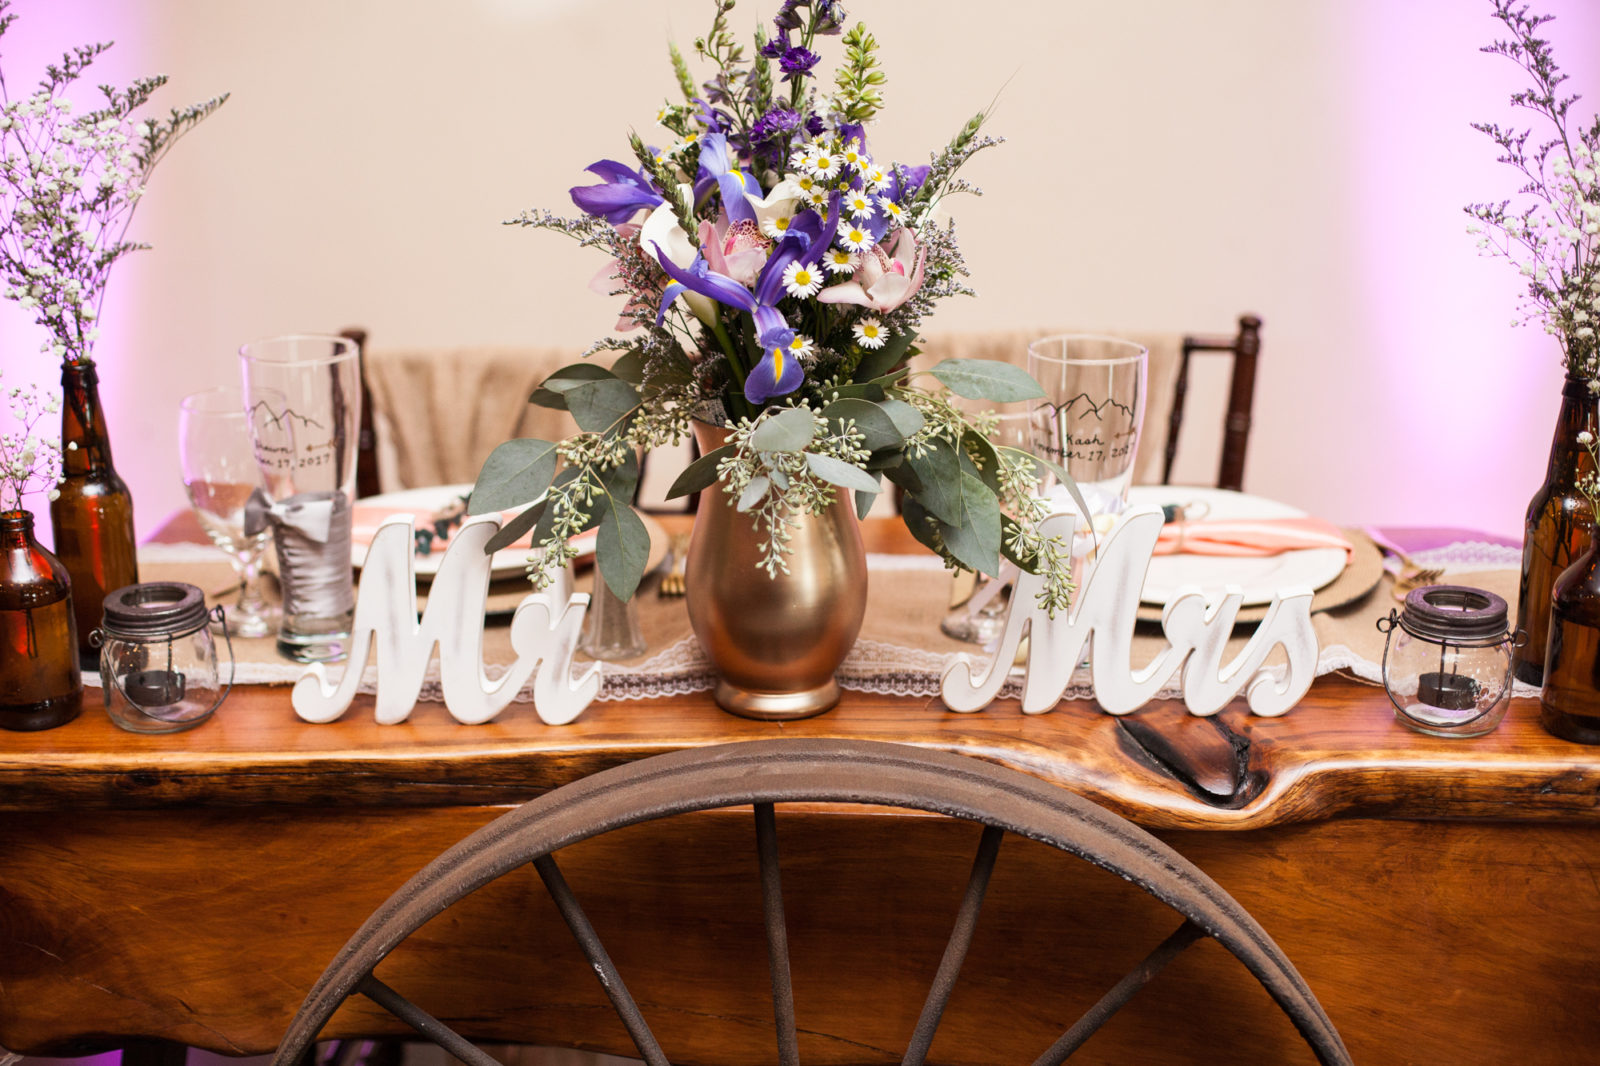 Mr and Mrs rustic sweetheart table